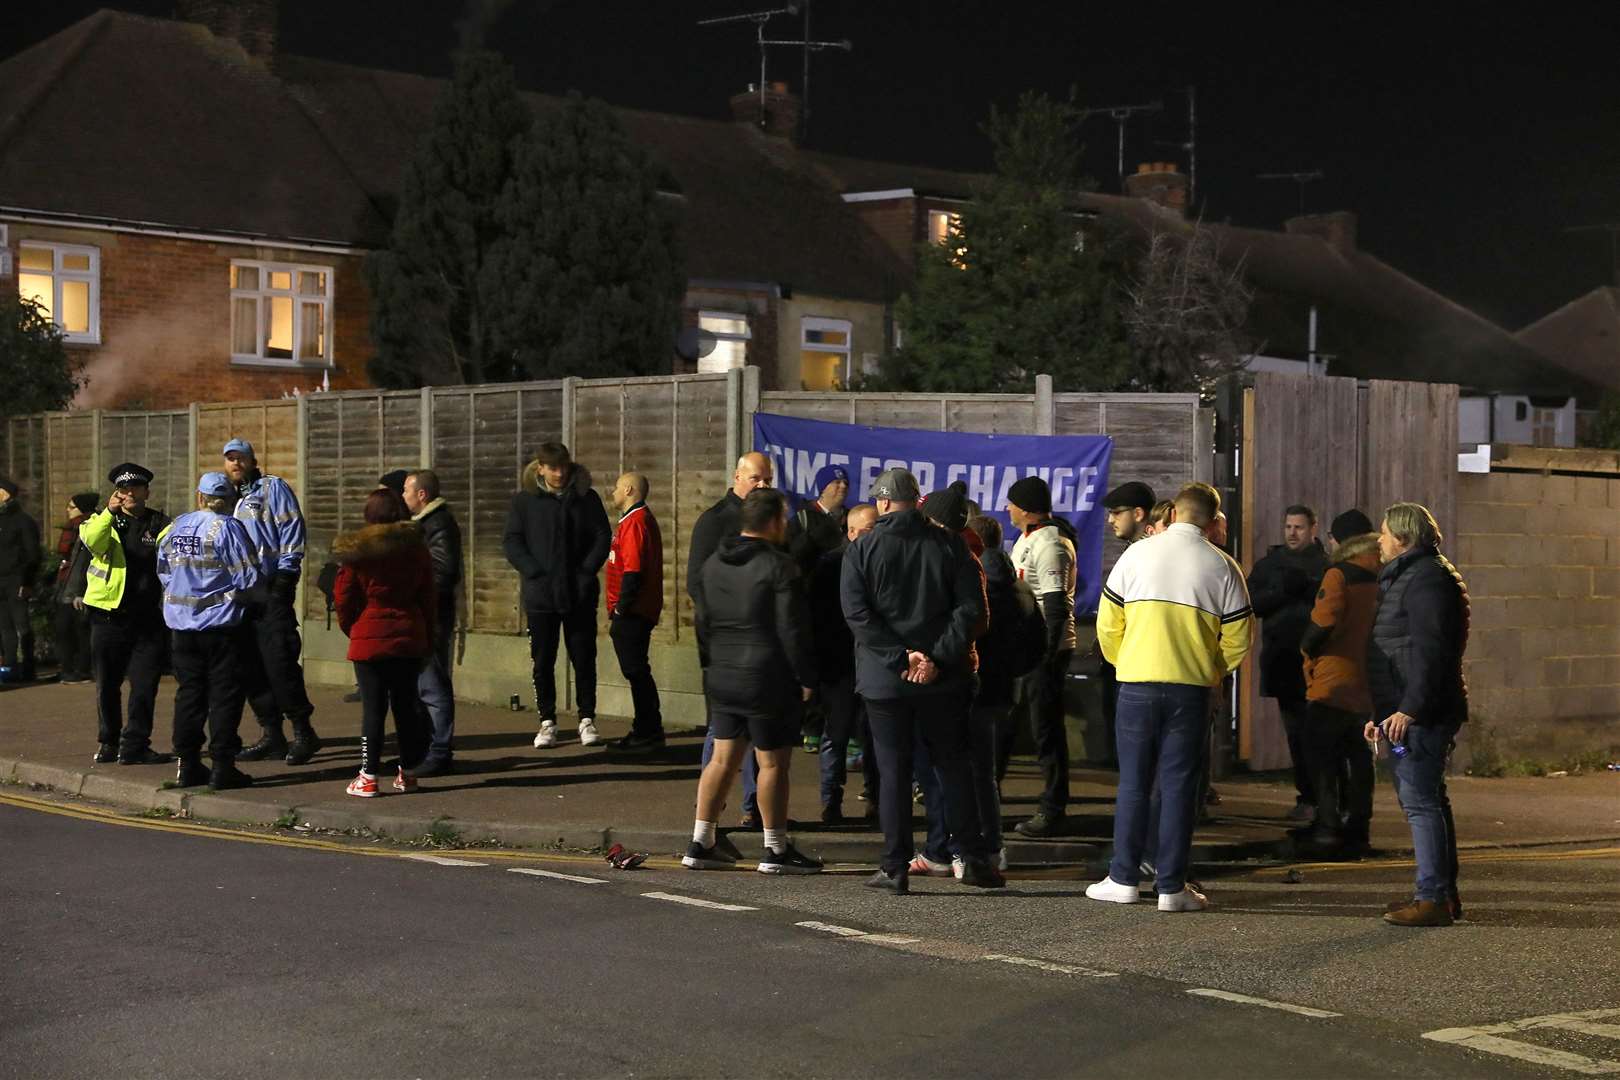 A group of about 40 fans gathered outside the Priestfield on Tuesday night saying it is 'time for change' in the way the club is being run. Picture: Andy Jones